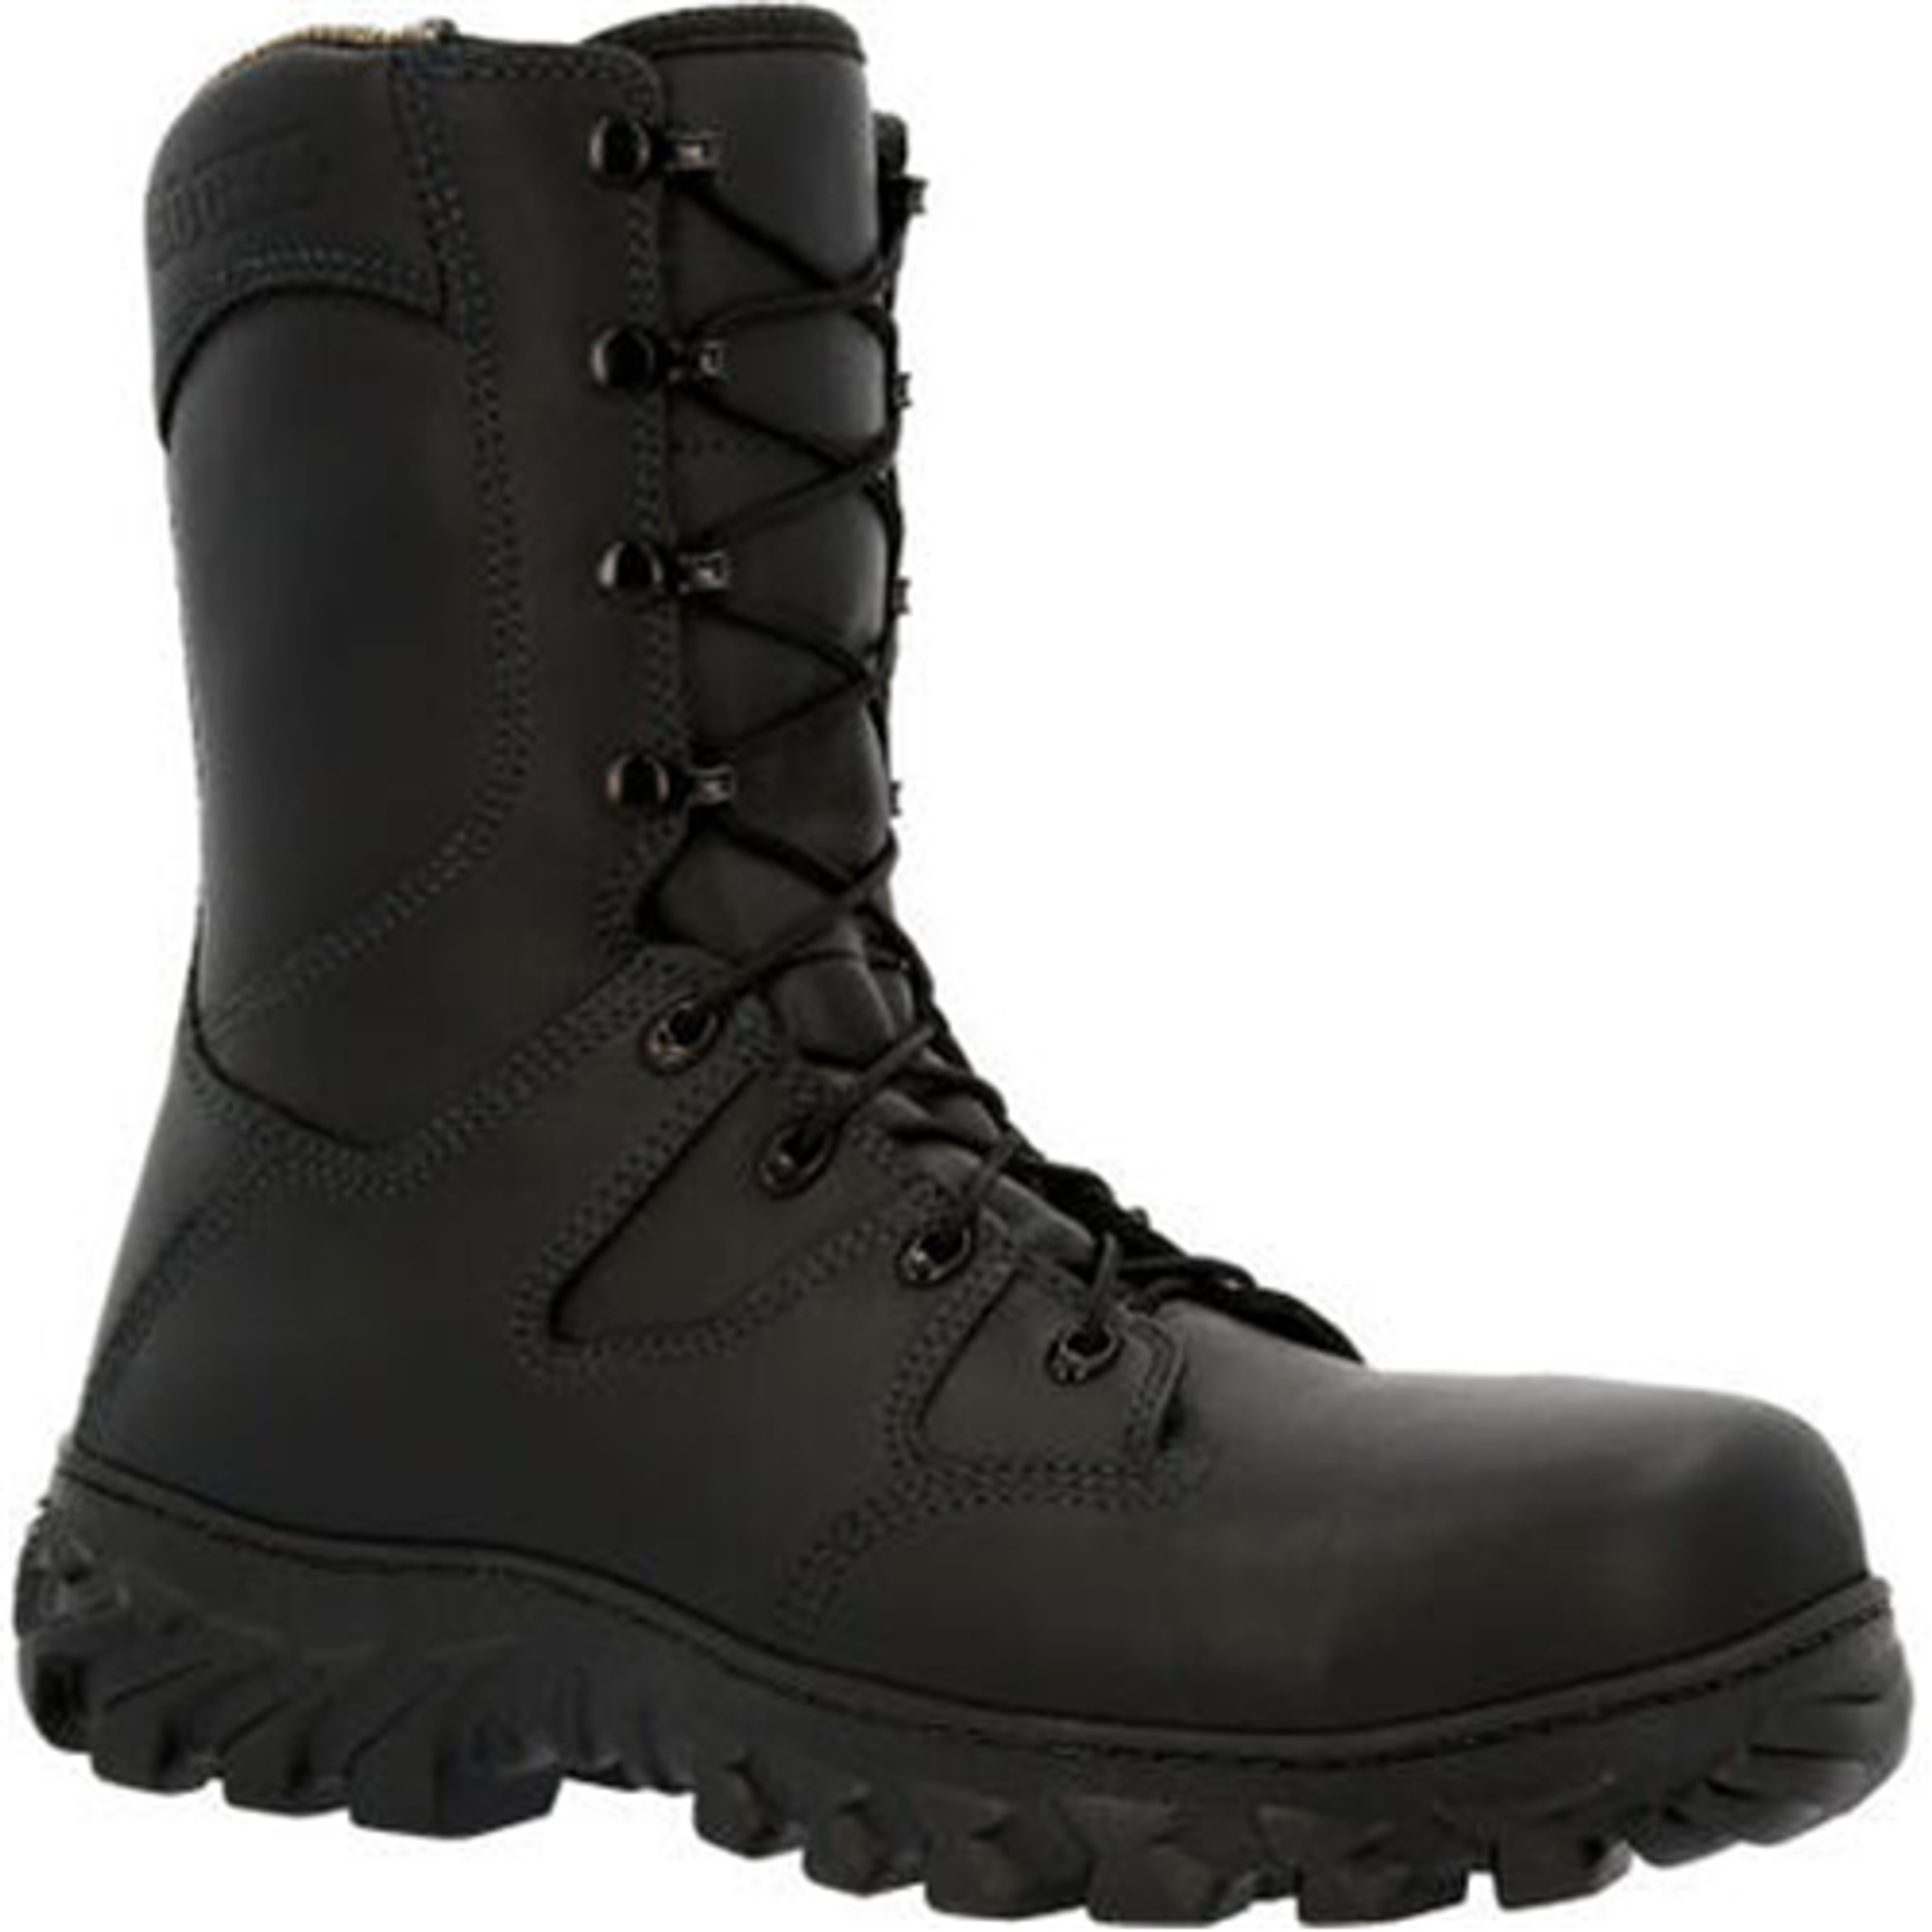 Rocky Code Red Rescue Fire Boot - KRRCK-RKD0086BK11M